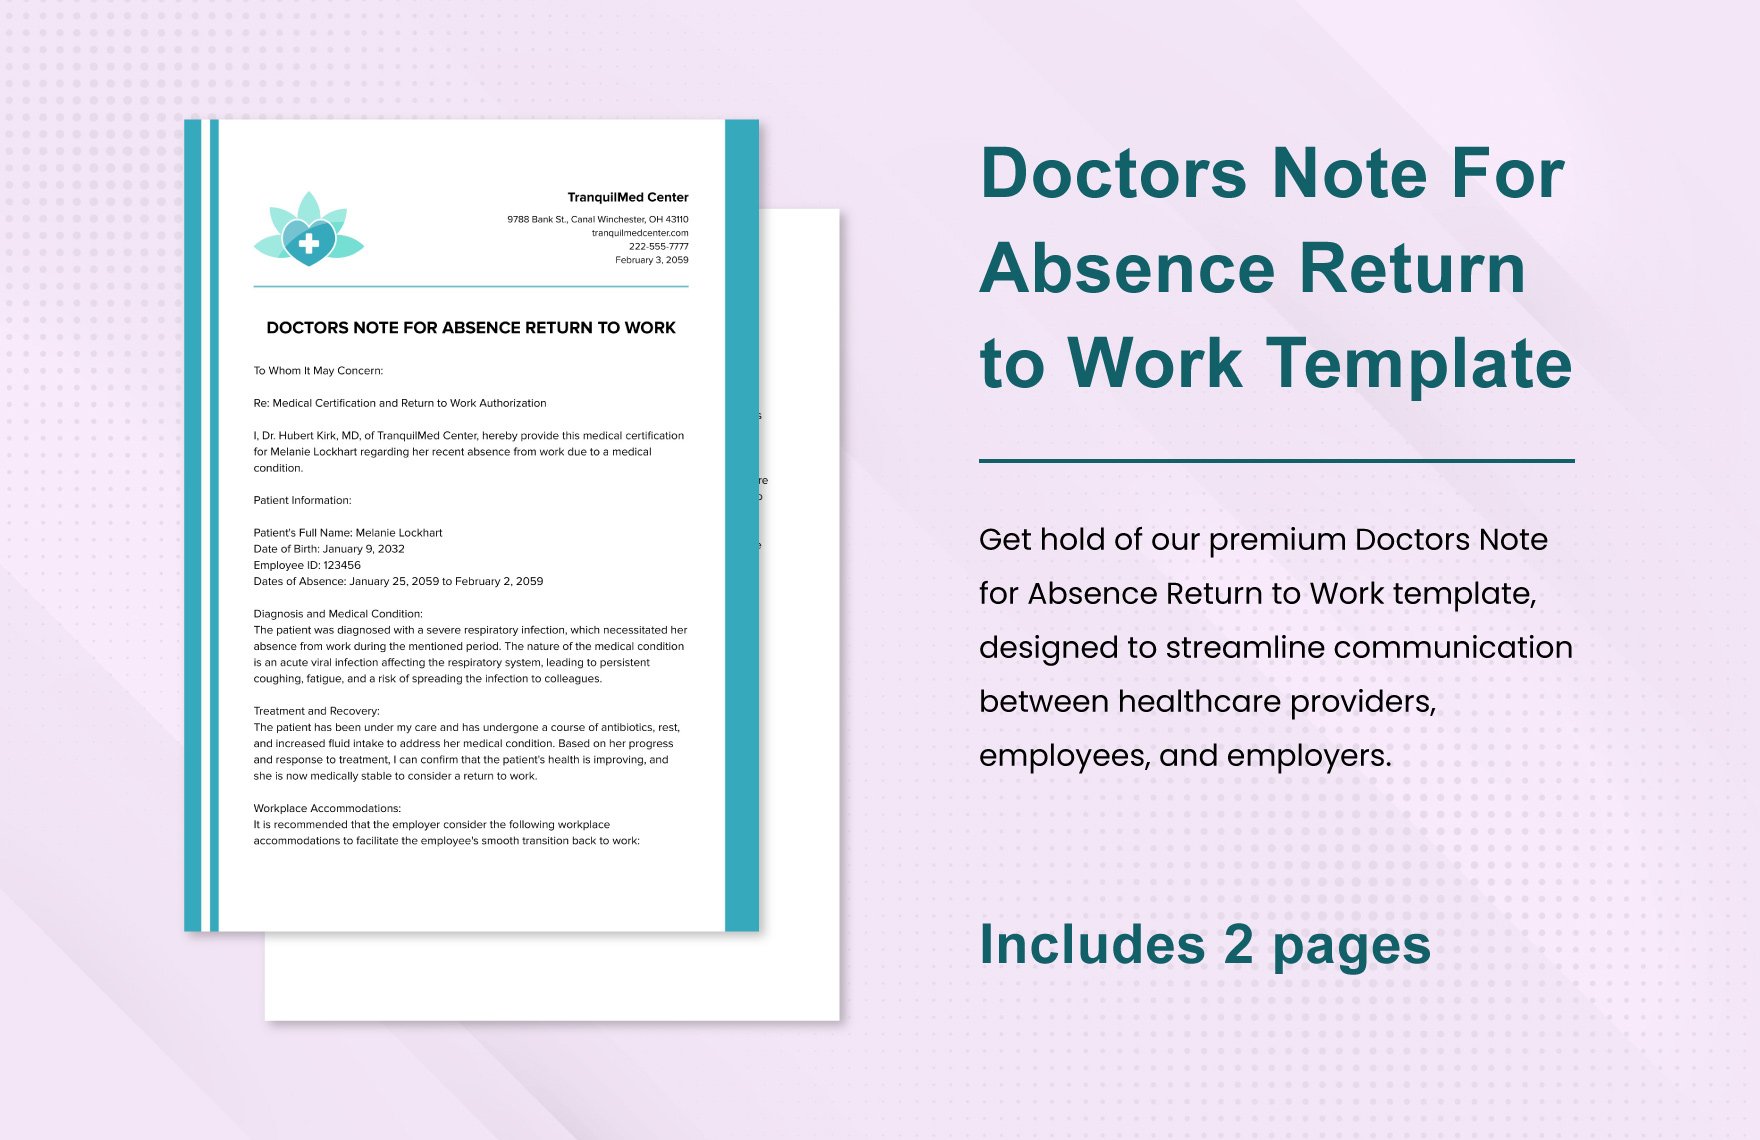 Doctors Note For Absence Return to Work Template